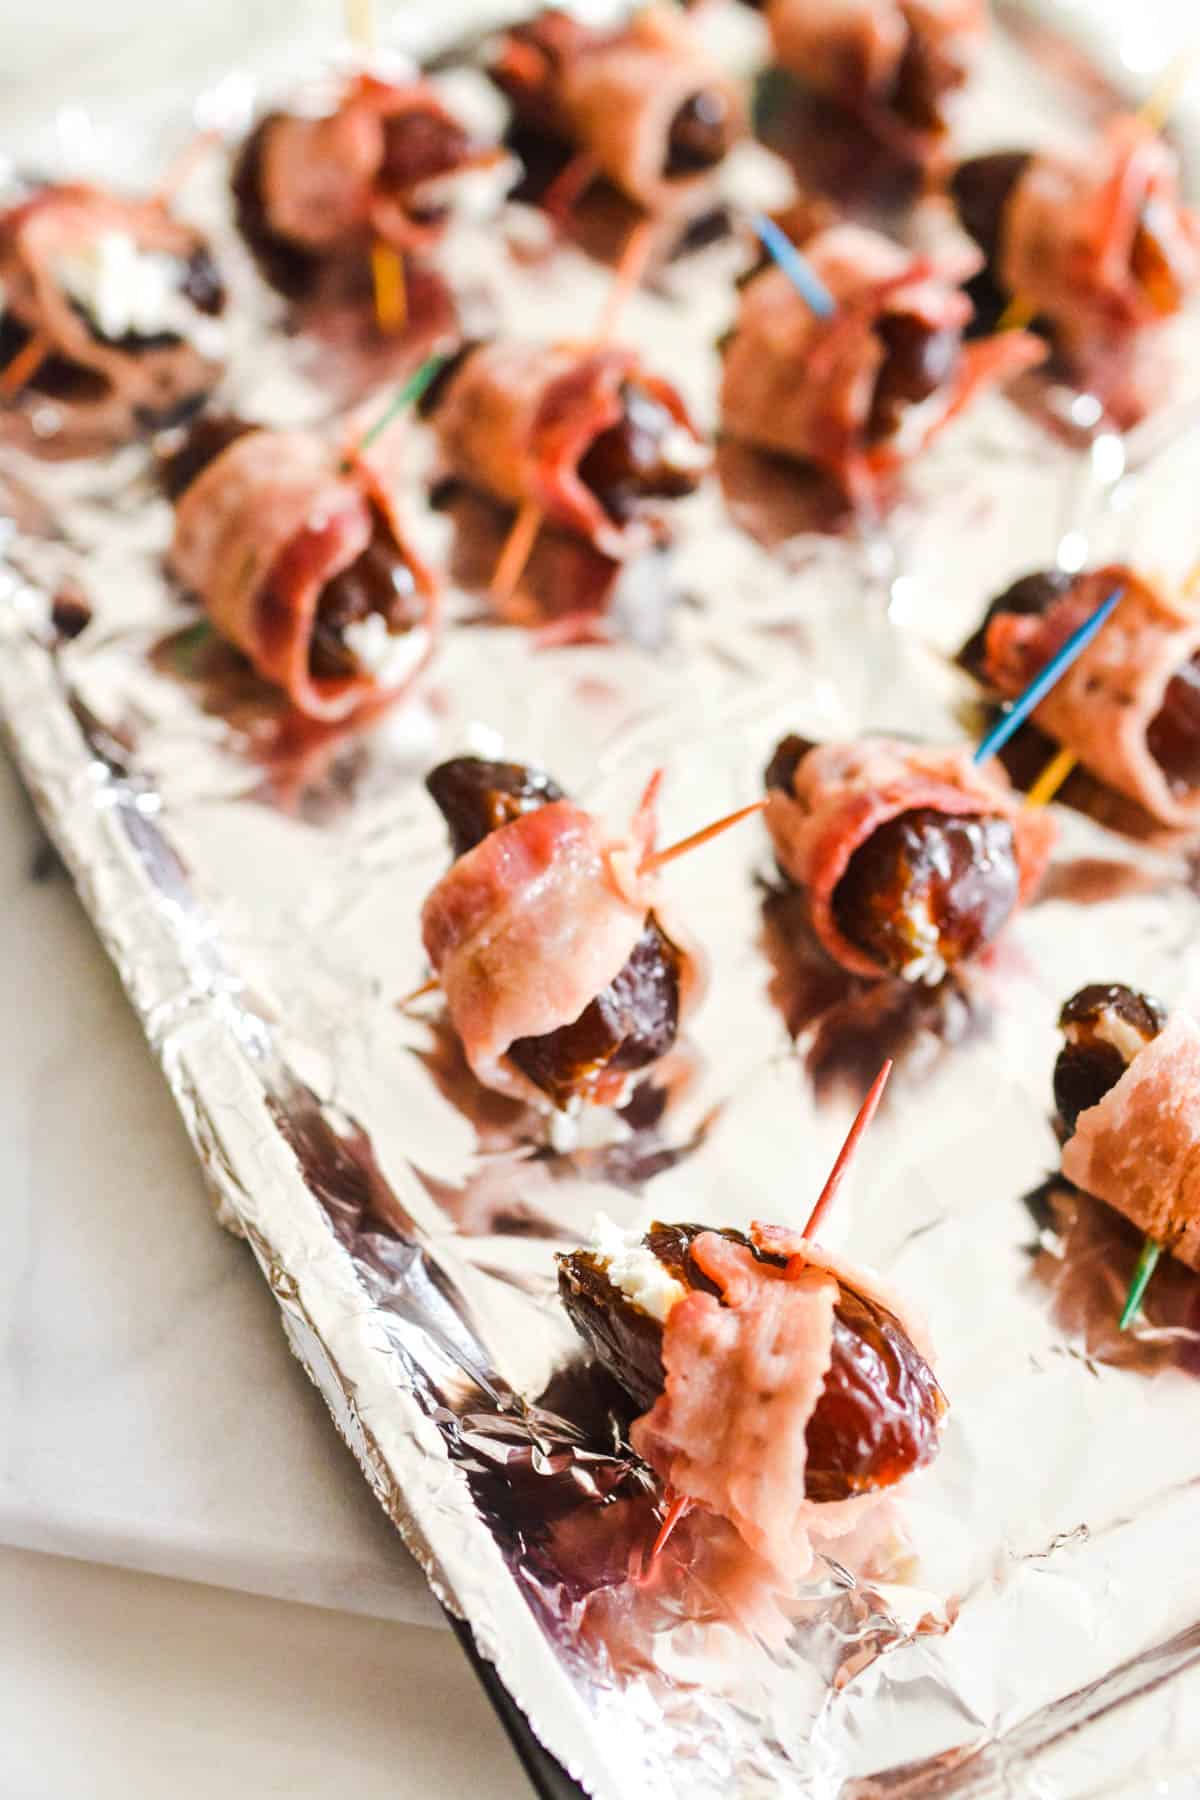 Bacon wrapped dates with toothpicks in them on a foil covered baking sheet.